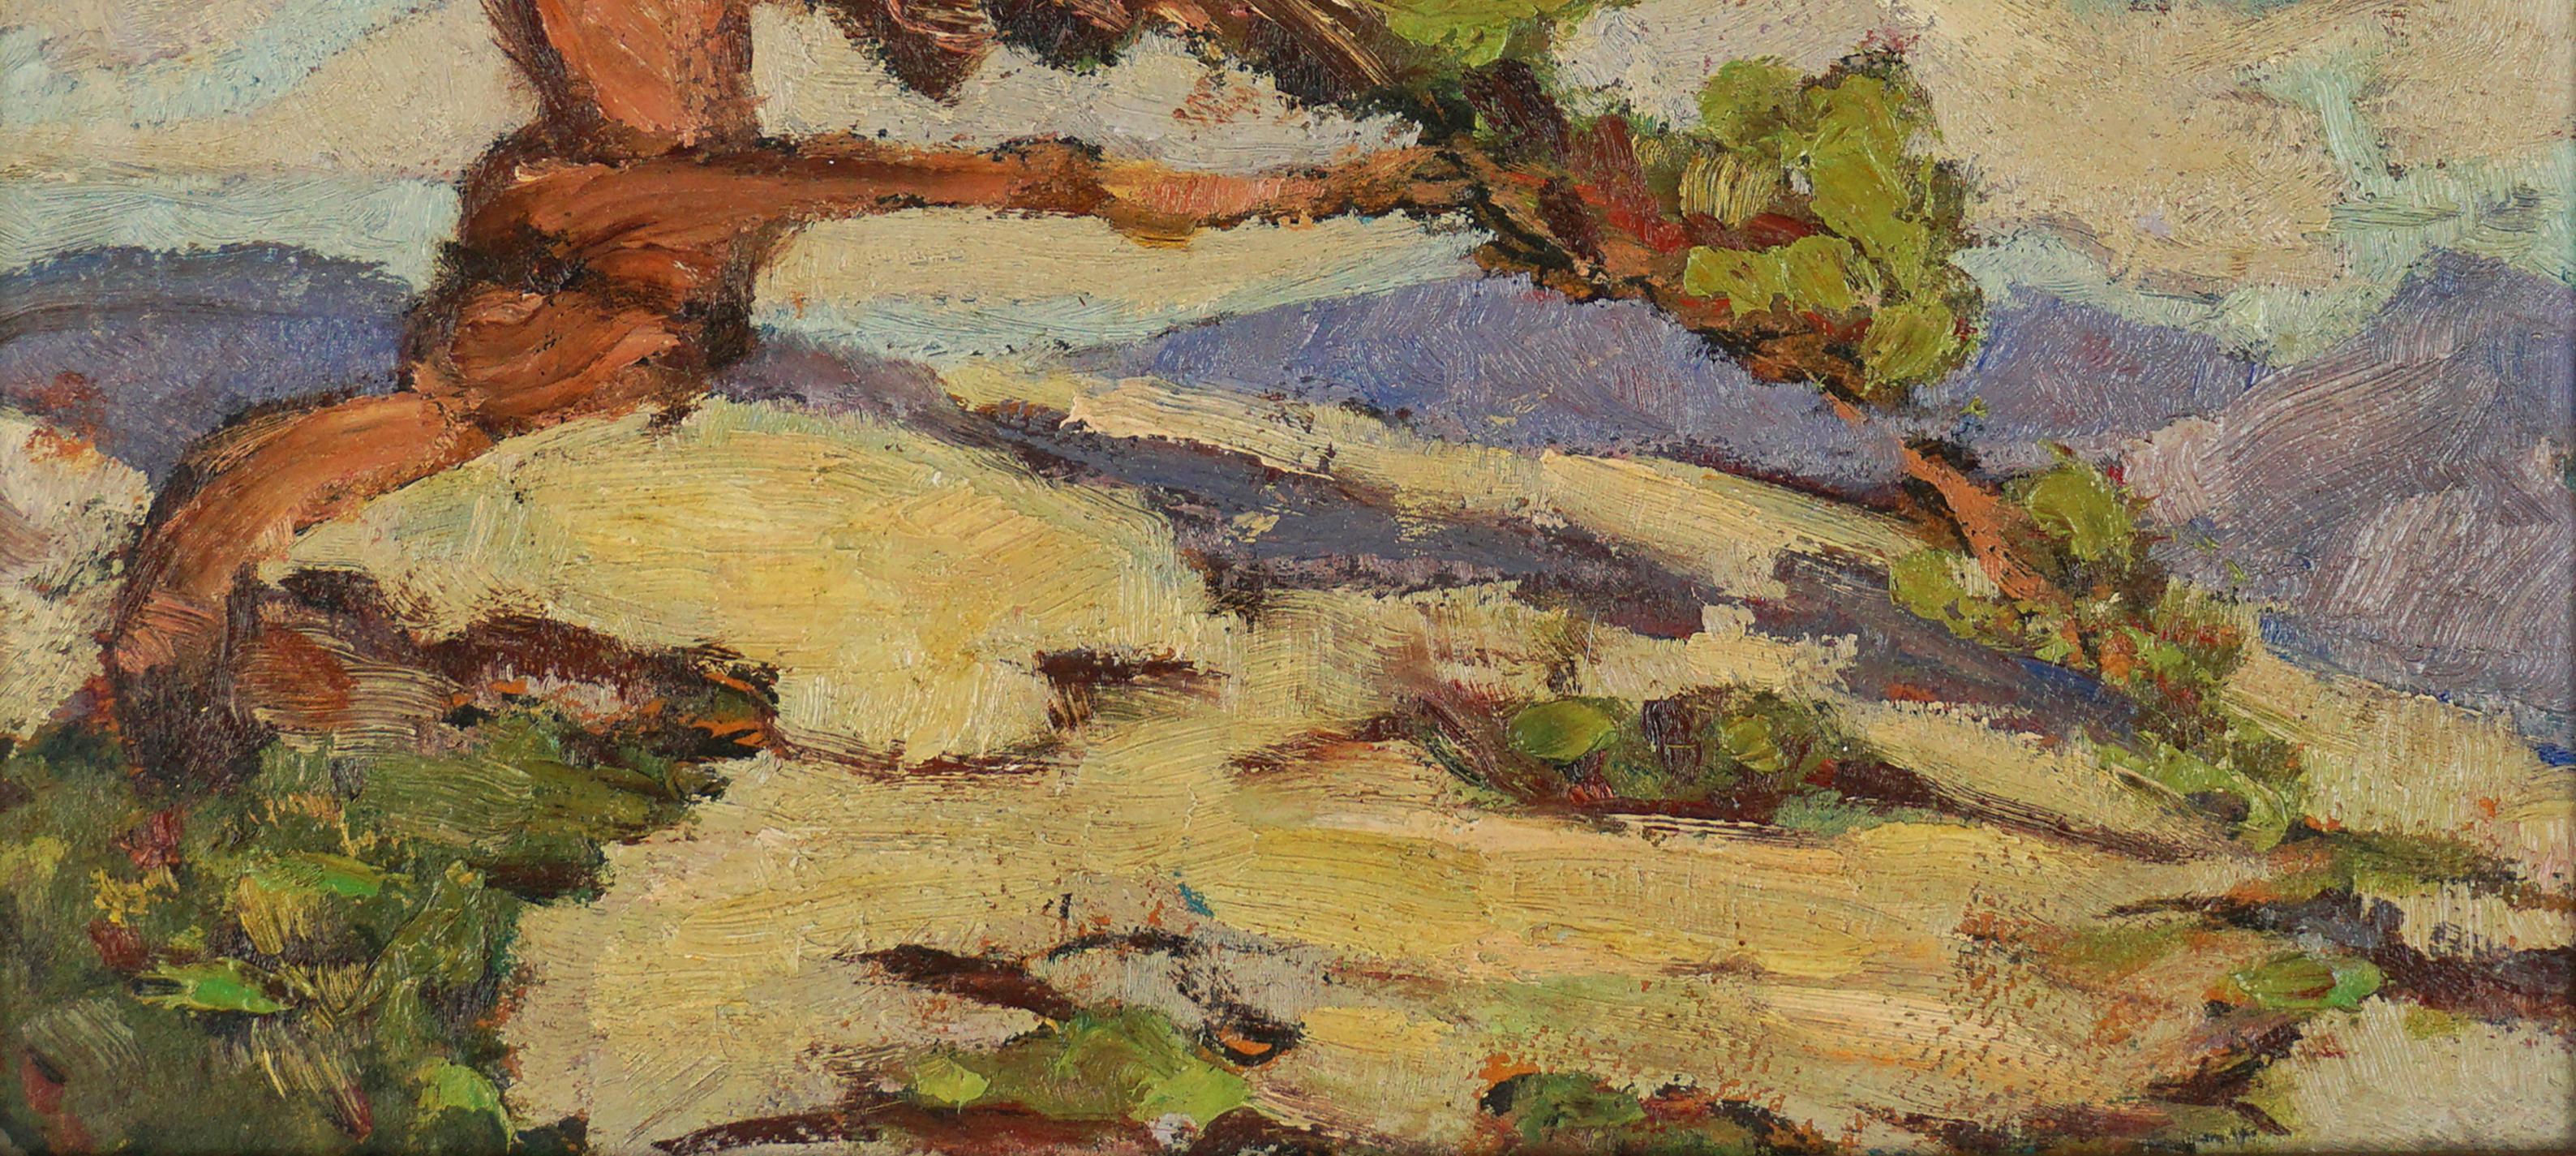 Wonderful California plein air painting in painterly impressionistic style of lone Cypress by Central Valley, California artist Barbara Tucker (American, 20th Century), 1945. Signed and dated on verso. Condition: Good; professionally cleaned.